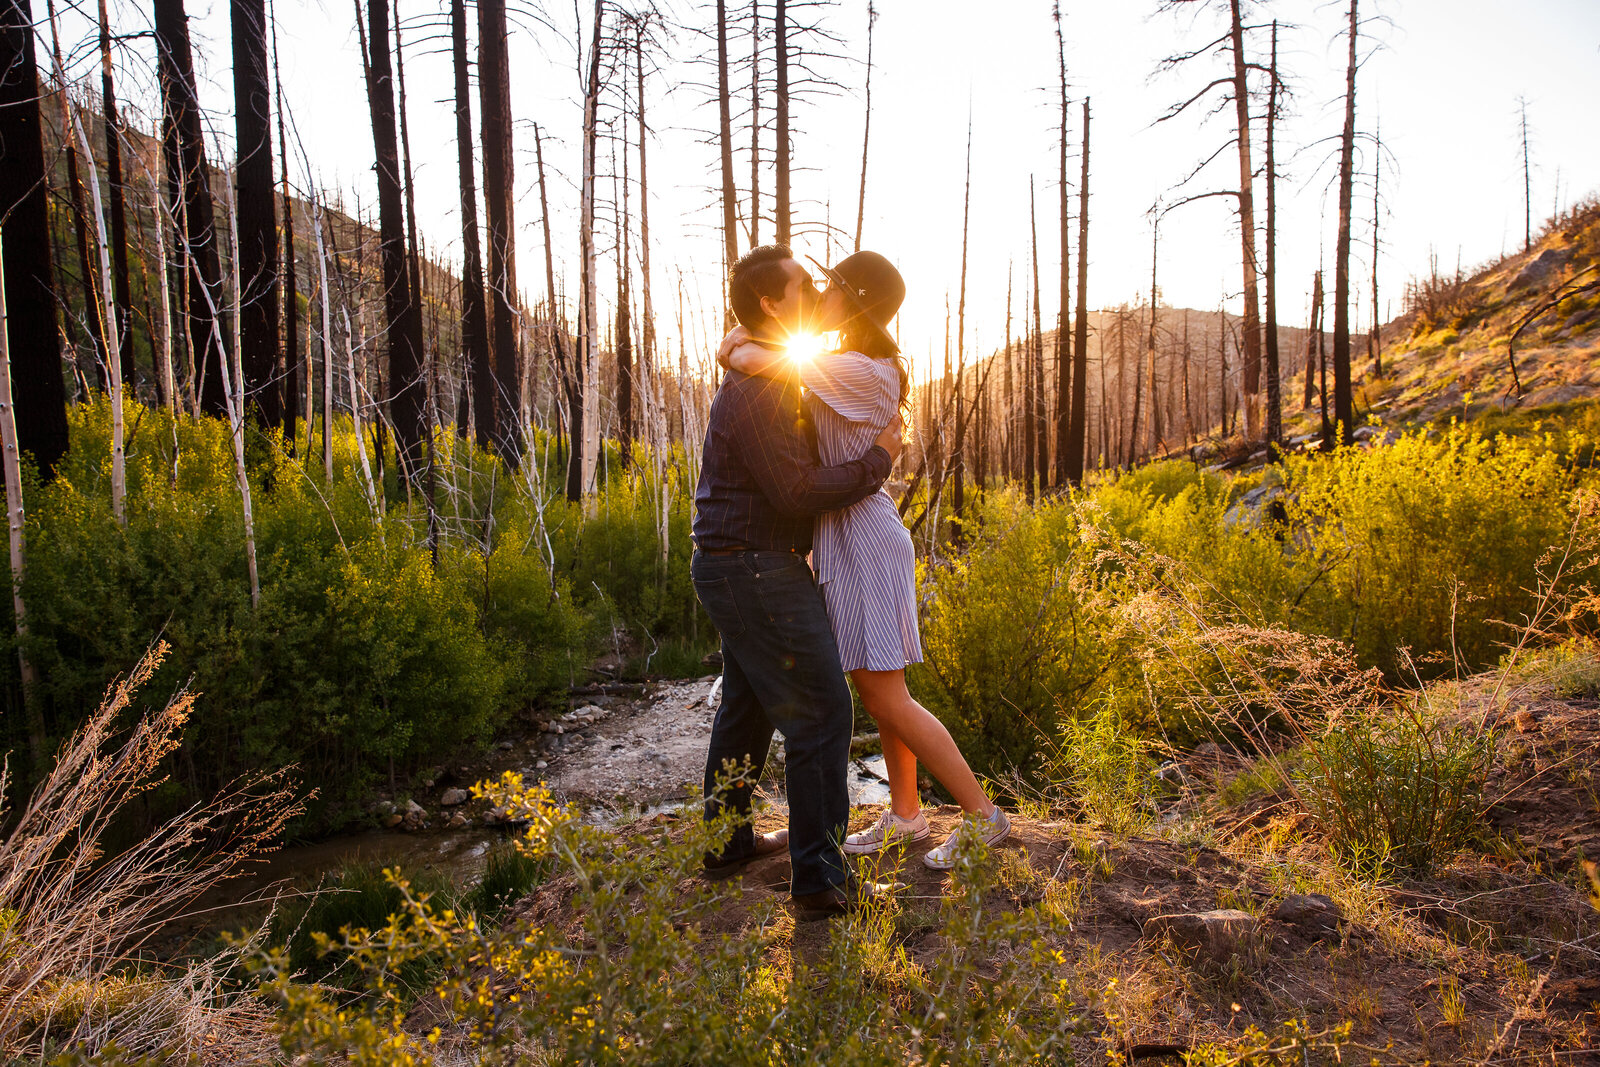 This couple had an adventurous engagement session in Big Bear, California.